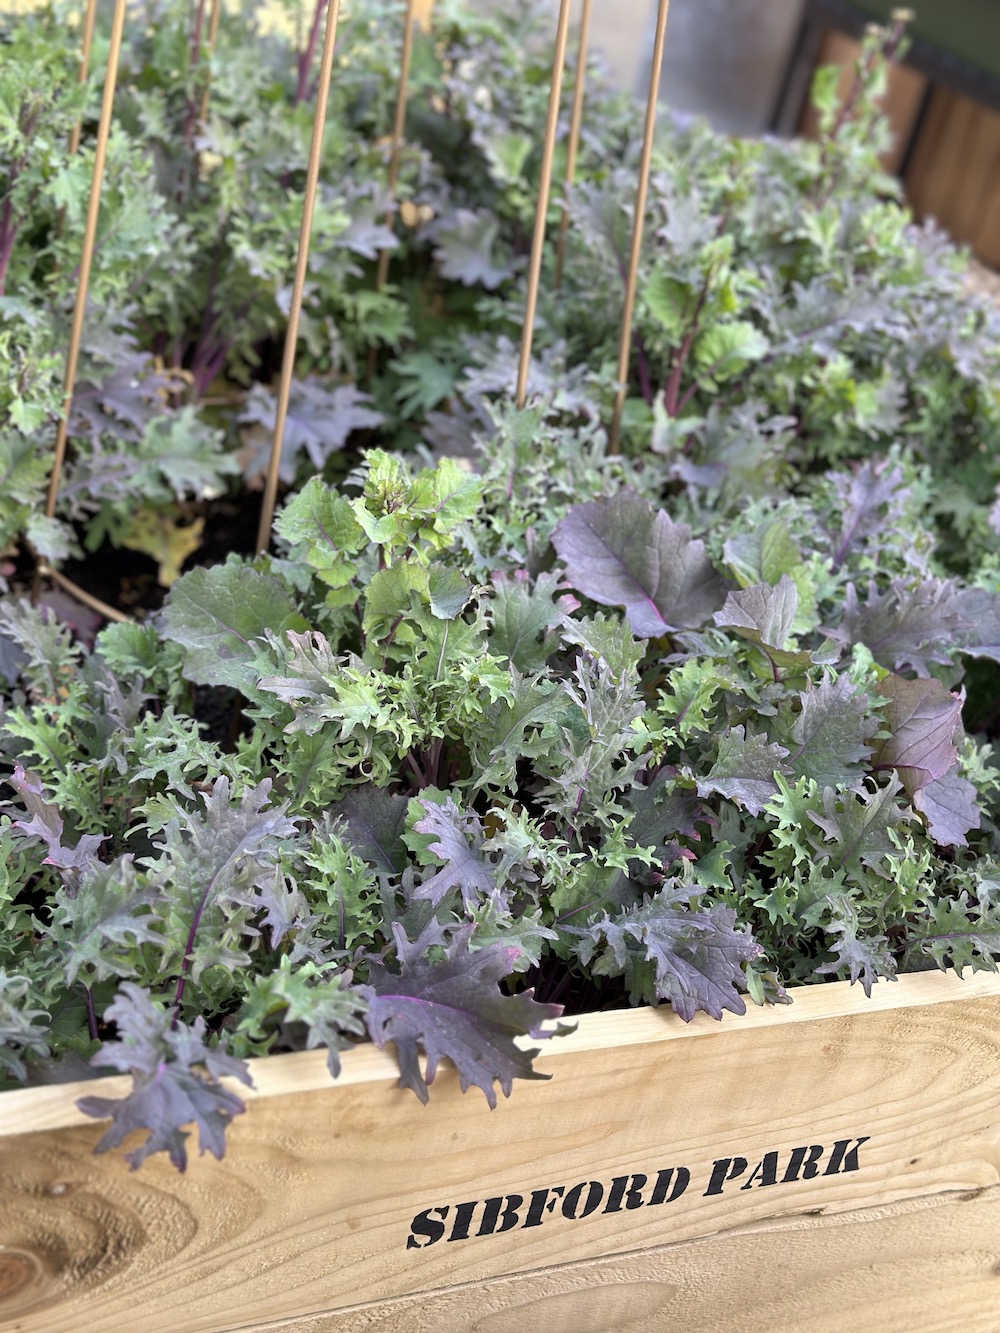 Masses of hardy Kale growing in wooden Sibford Park trough 